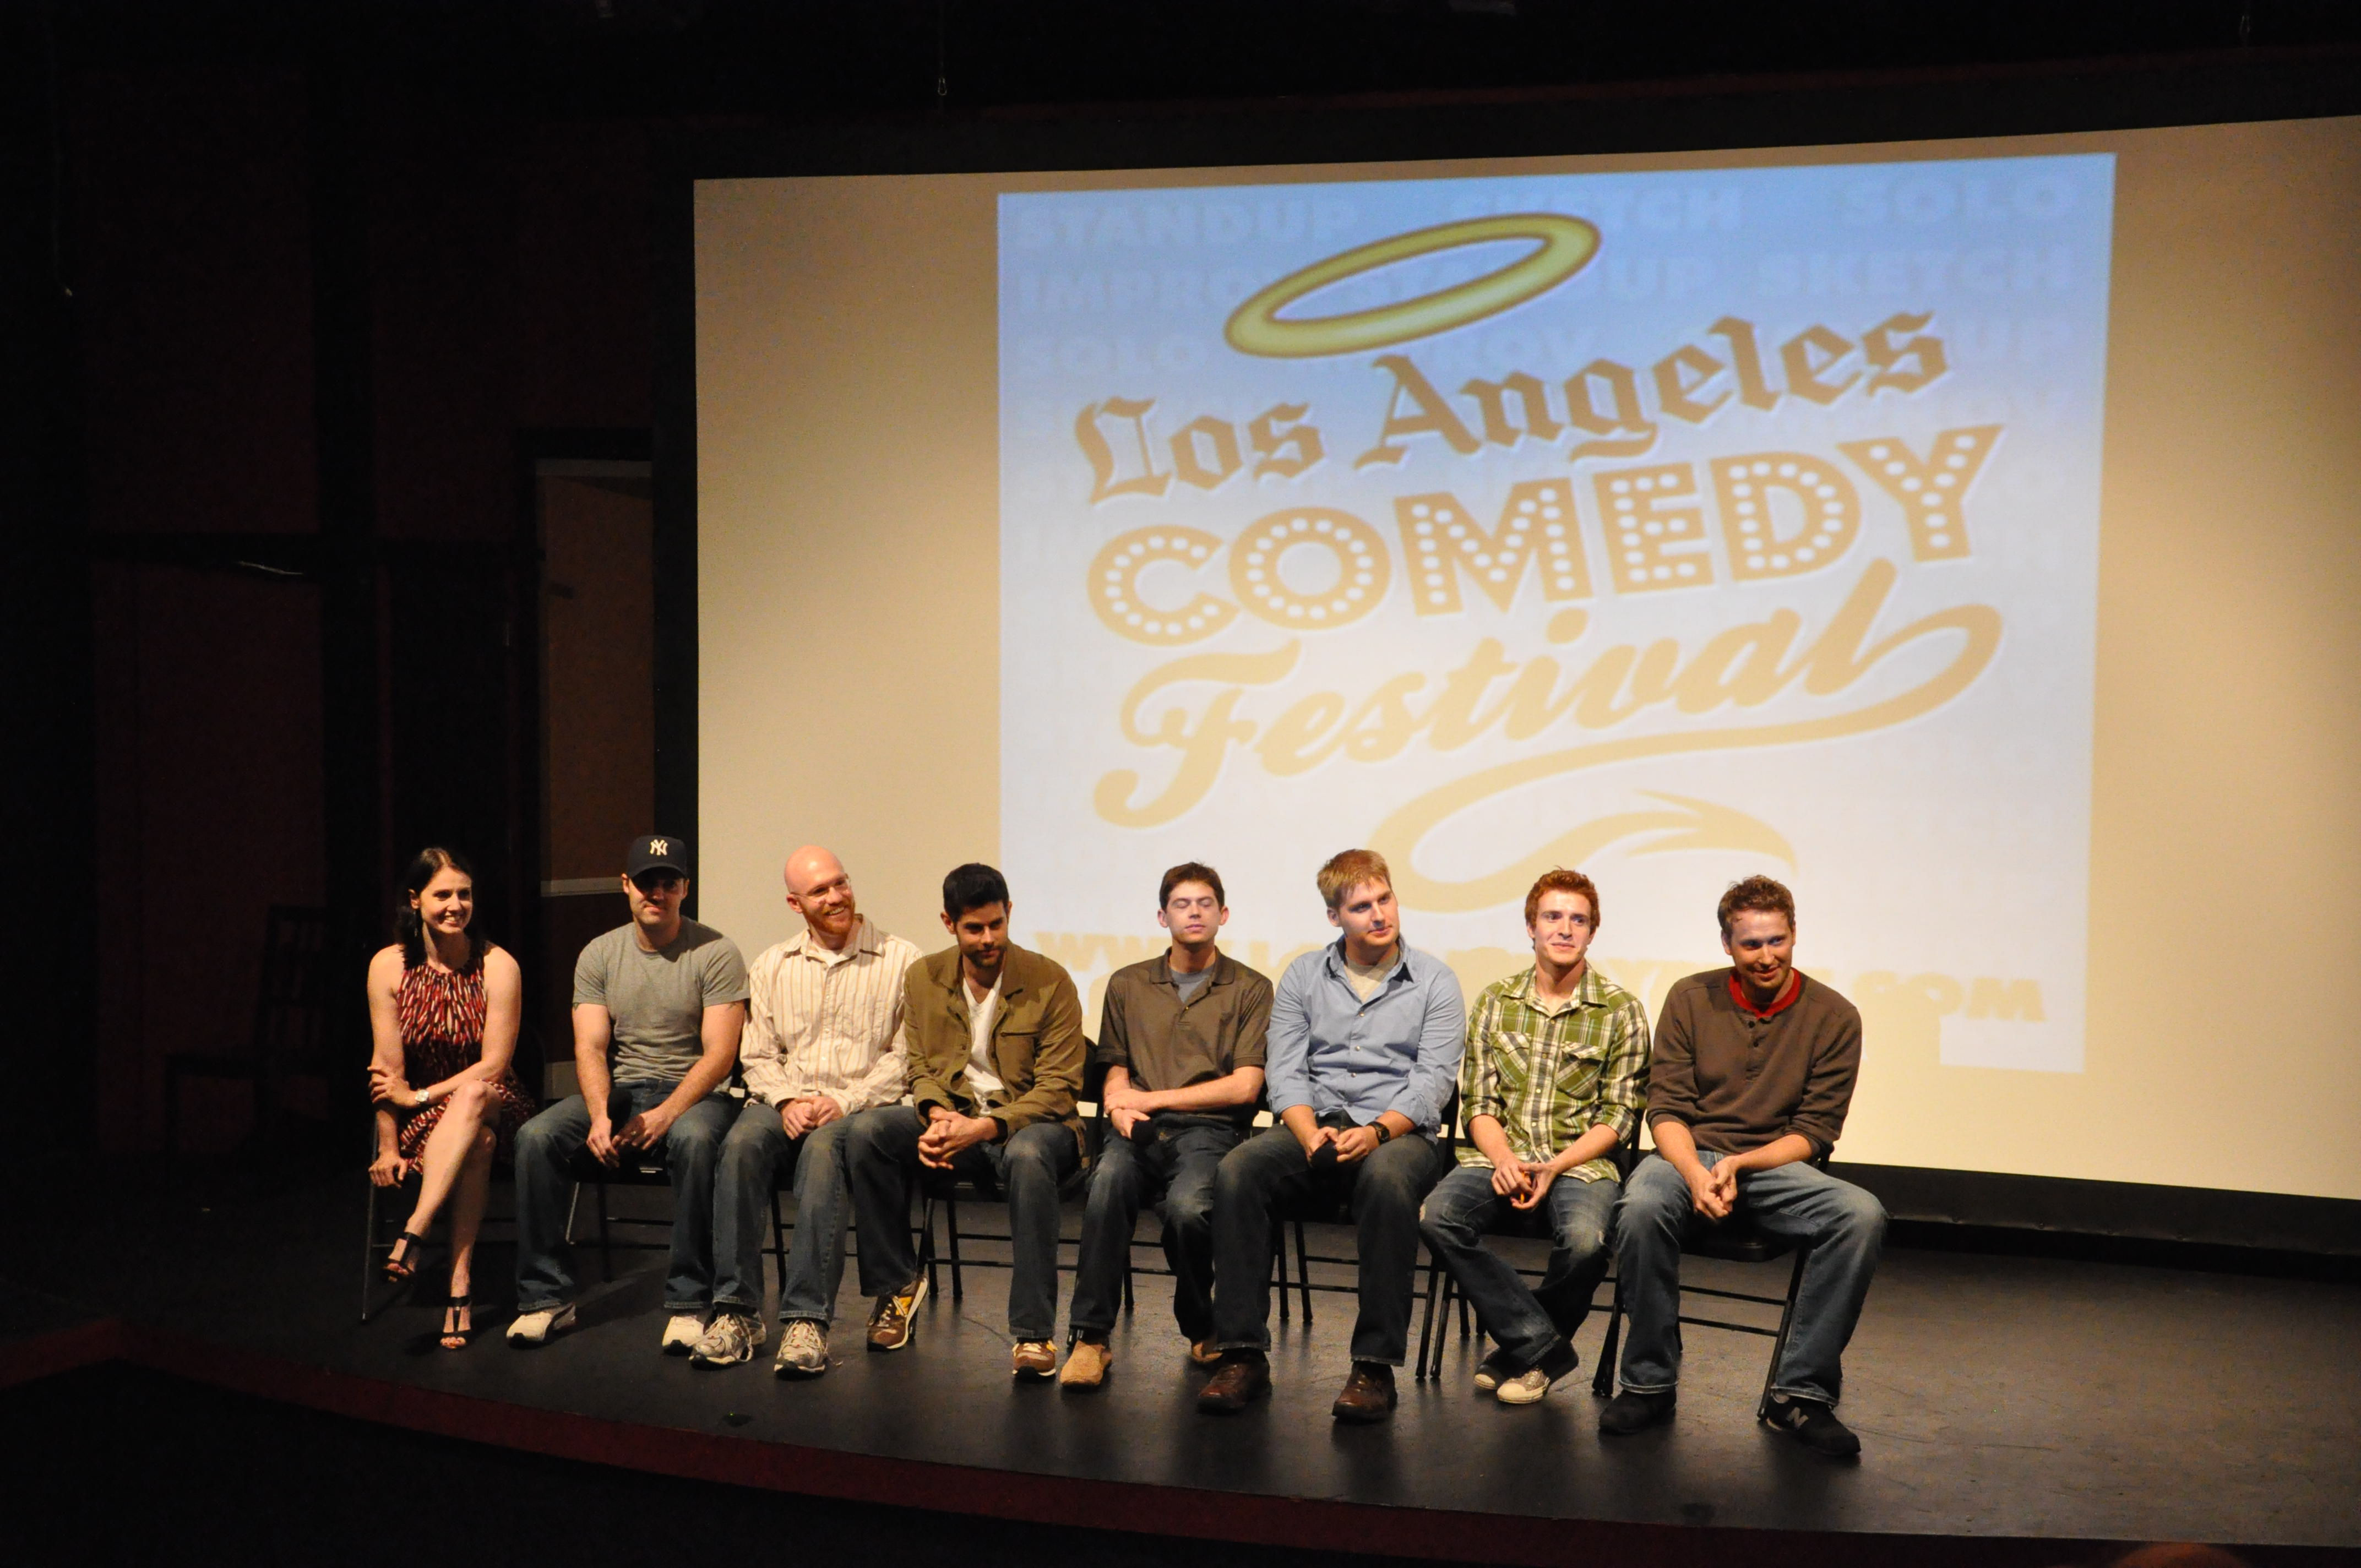 Q and A for Los Angeles Comedy Festival.